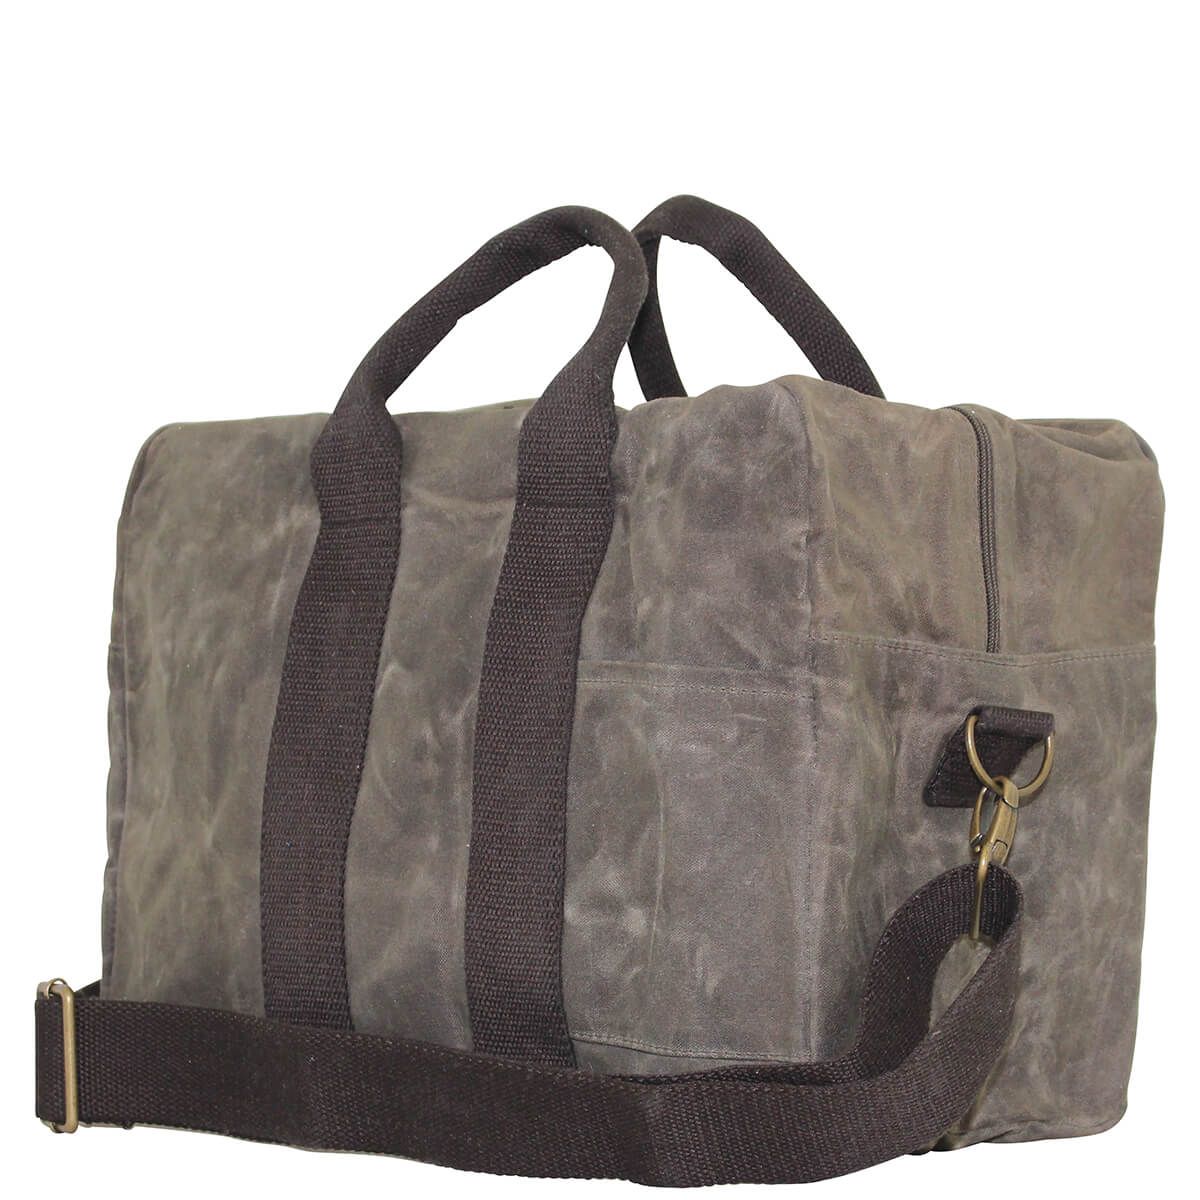 Monogrammed Waxed Canvas Voyager Carry On Bag- Great for Men!